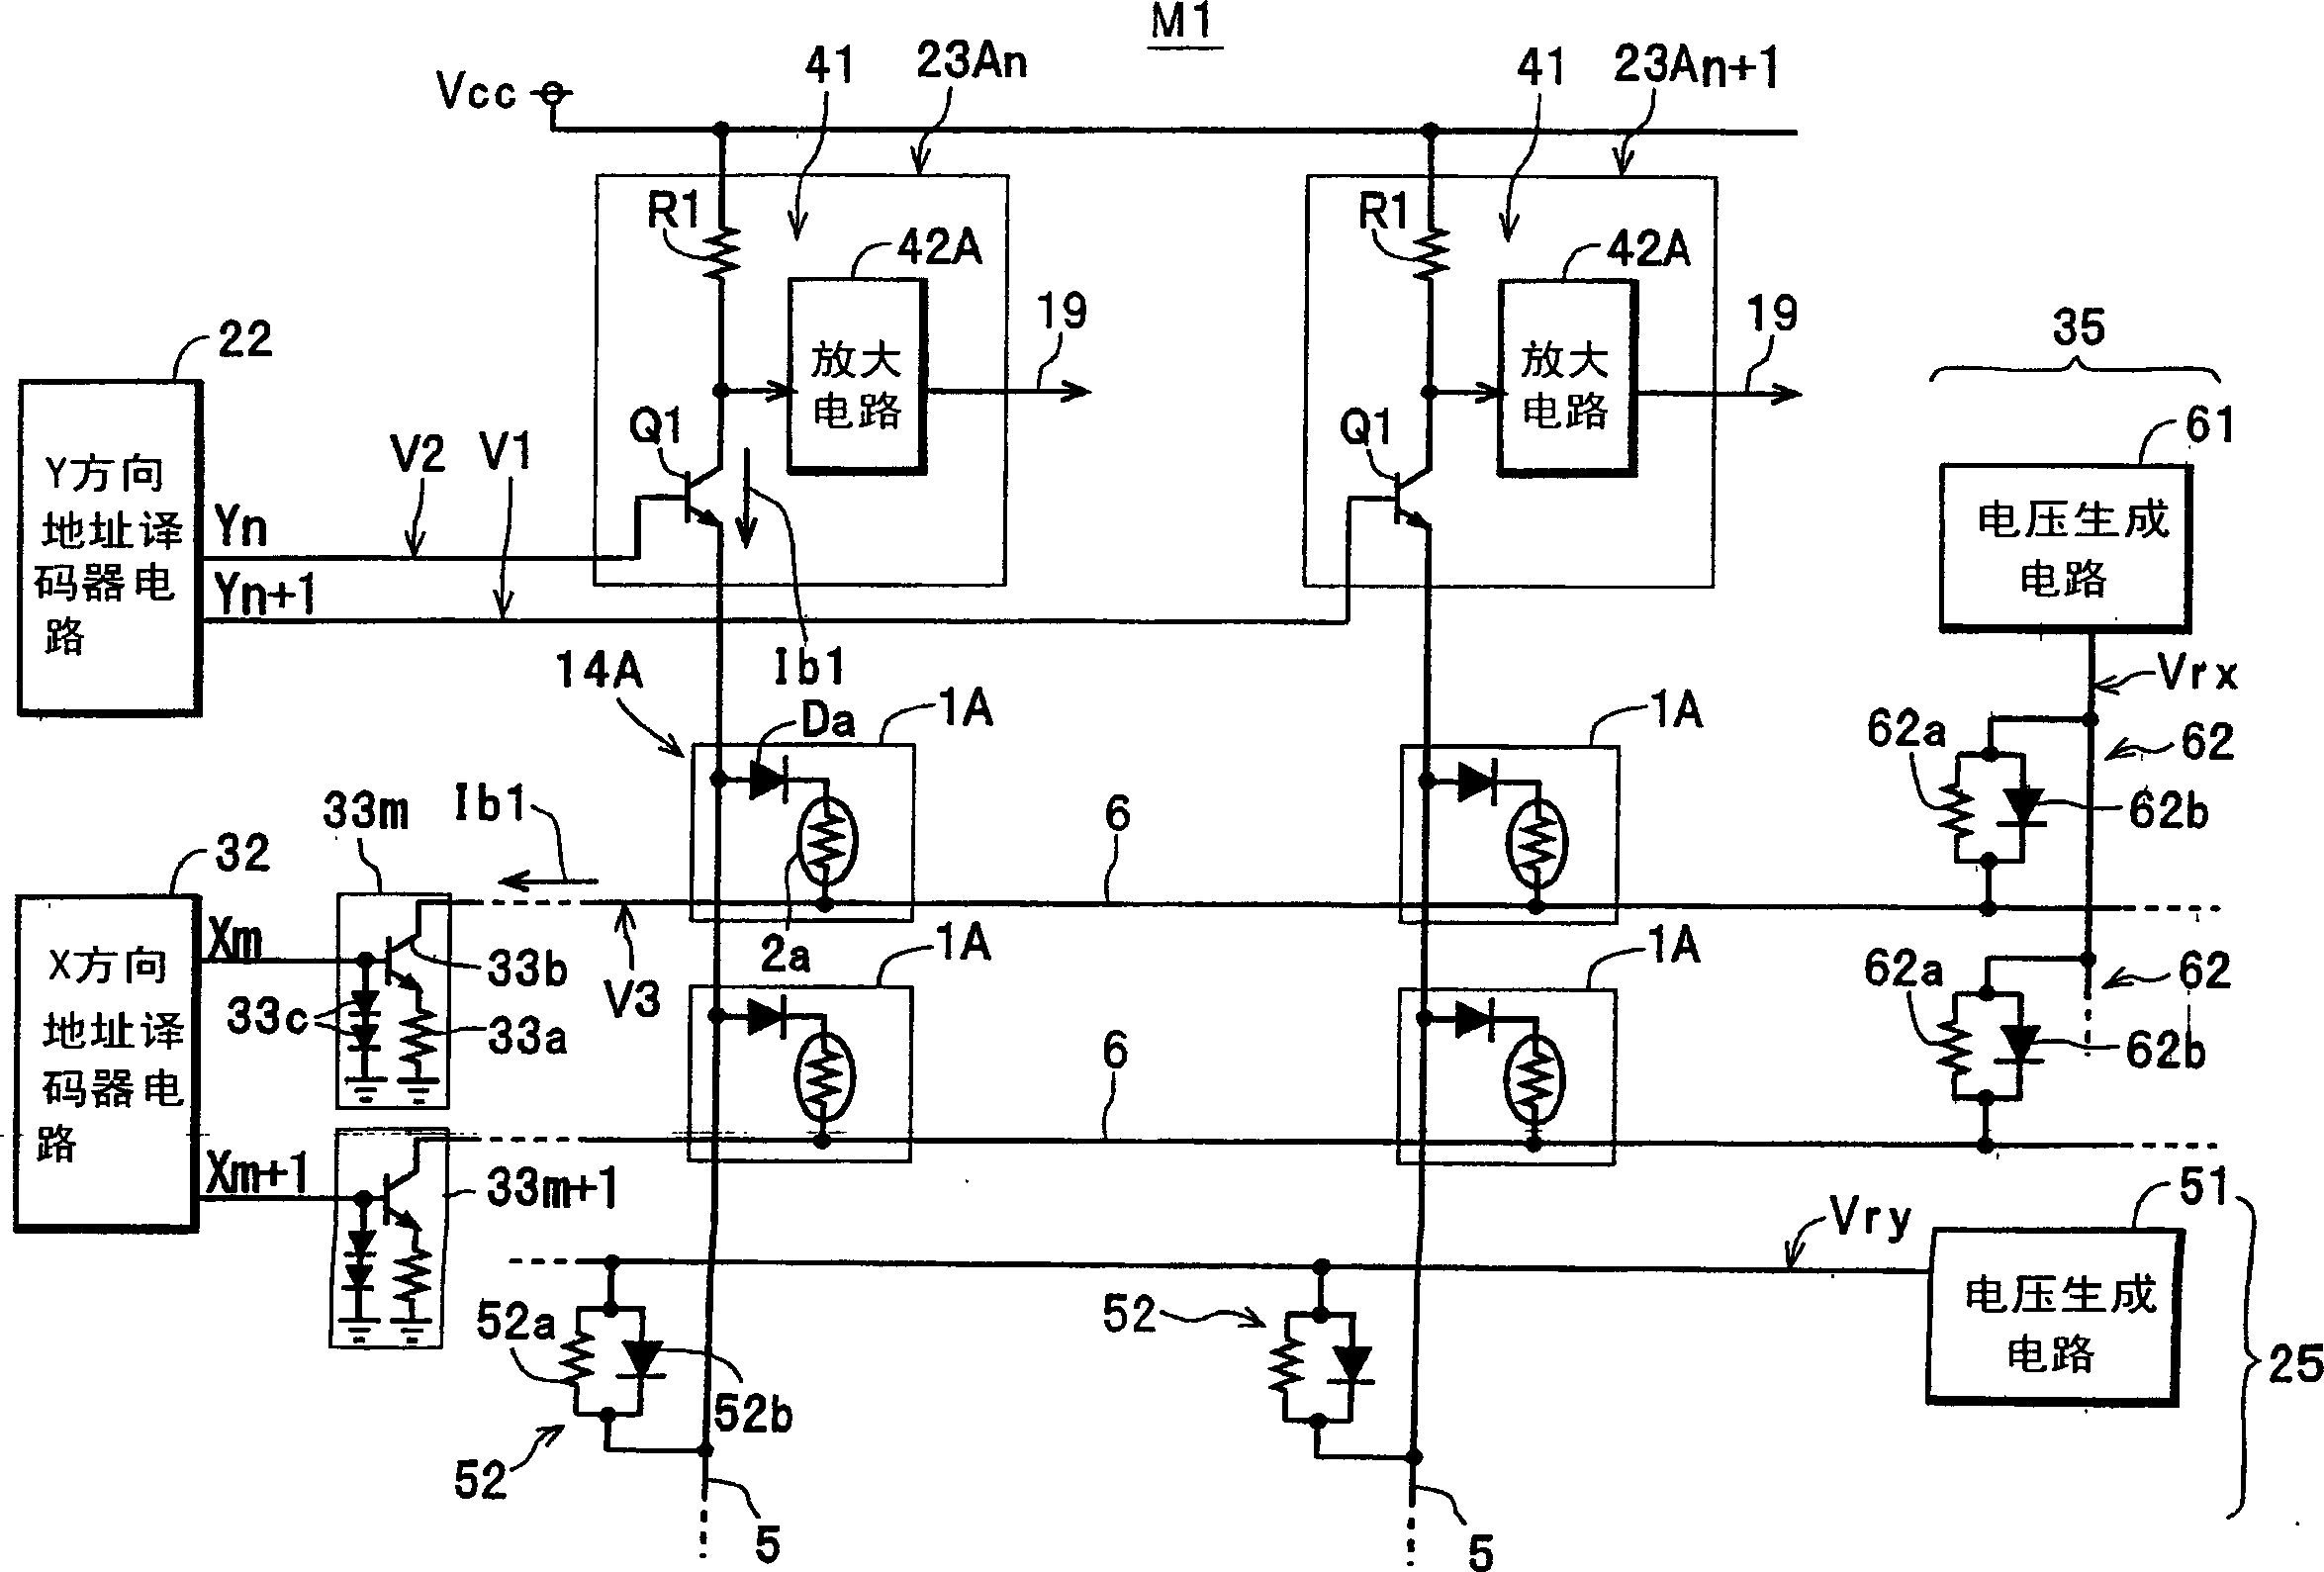 Magnetic memory device